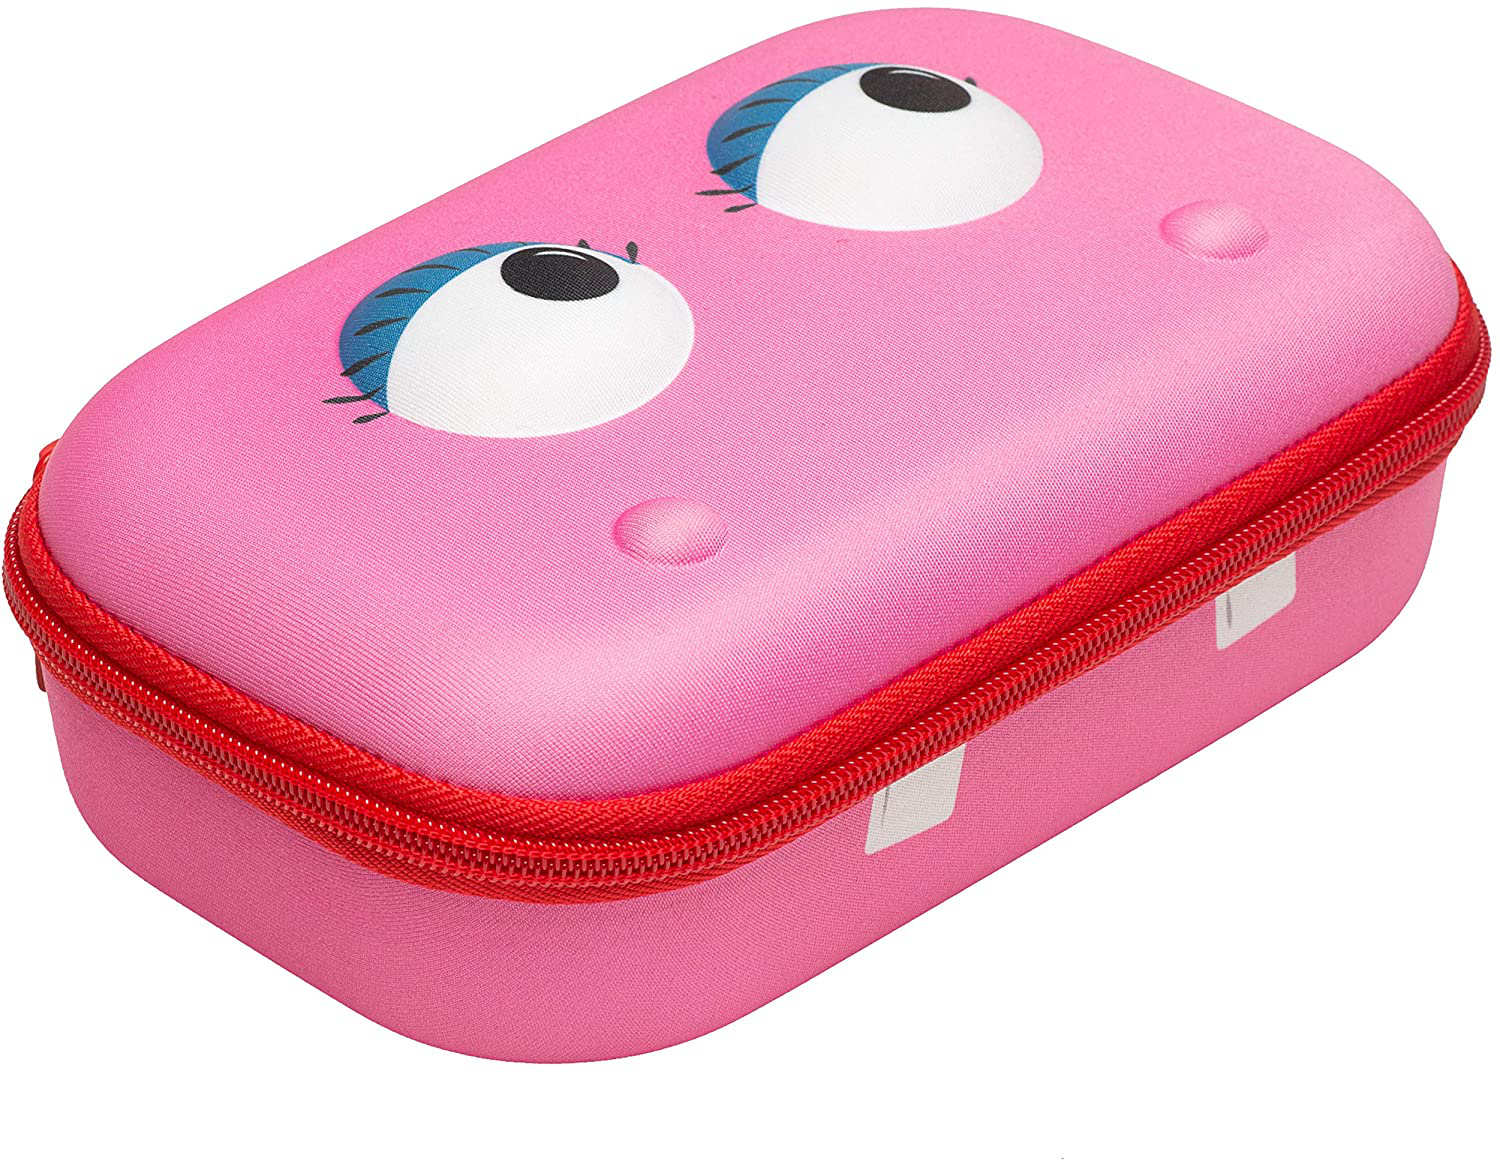 Pencil Box for Kids, Cute Storage Case for School Supplies, Holds Up to 60 Pens, Secure Zipper Closure, Machine Washable